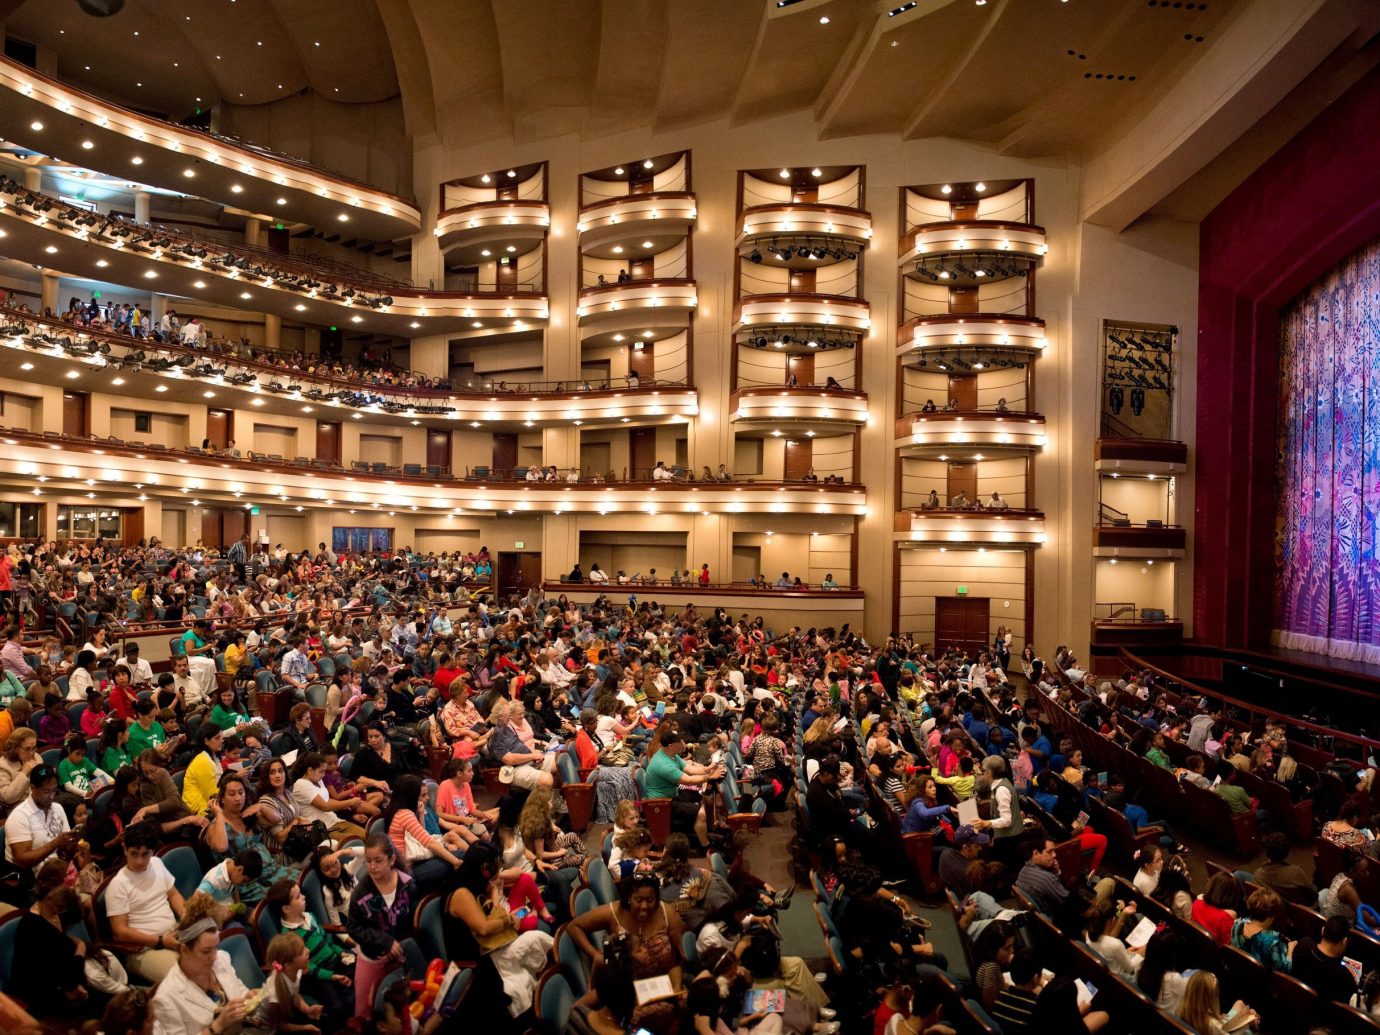 Budget indoor person ceiling crowd audience people auditorium stage musical theatre theatre convention hall